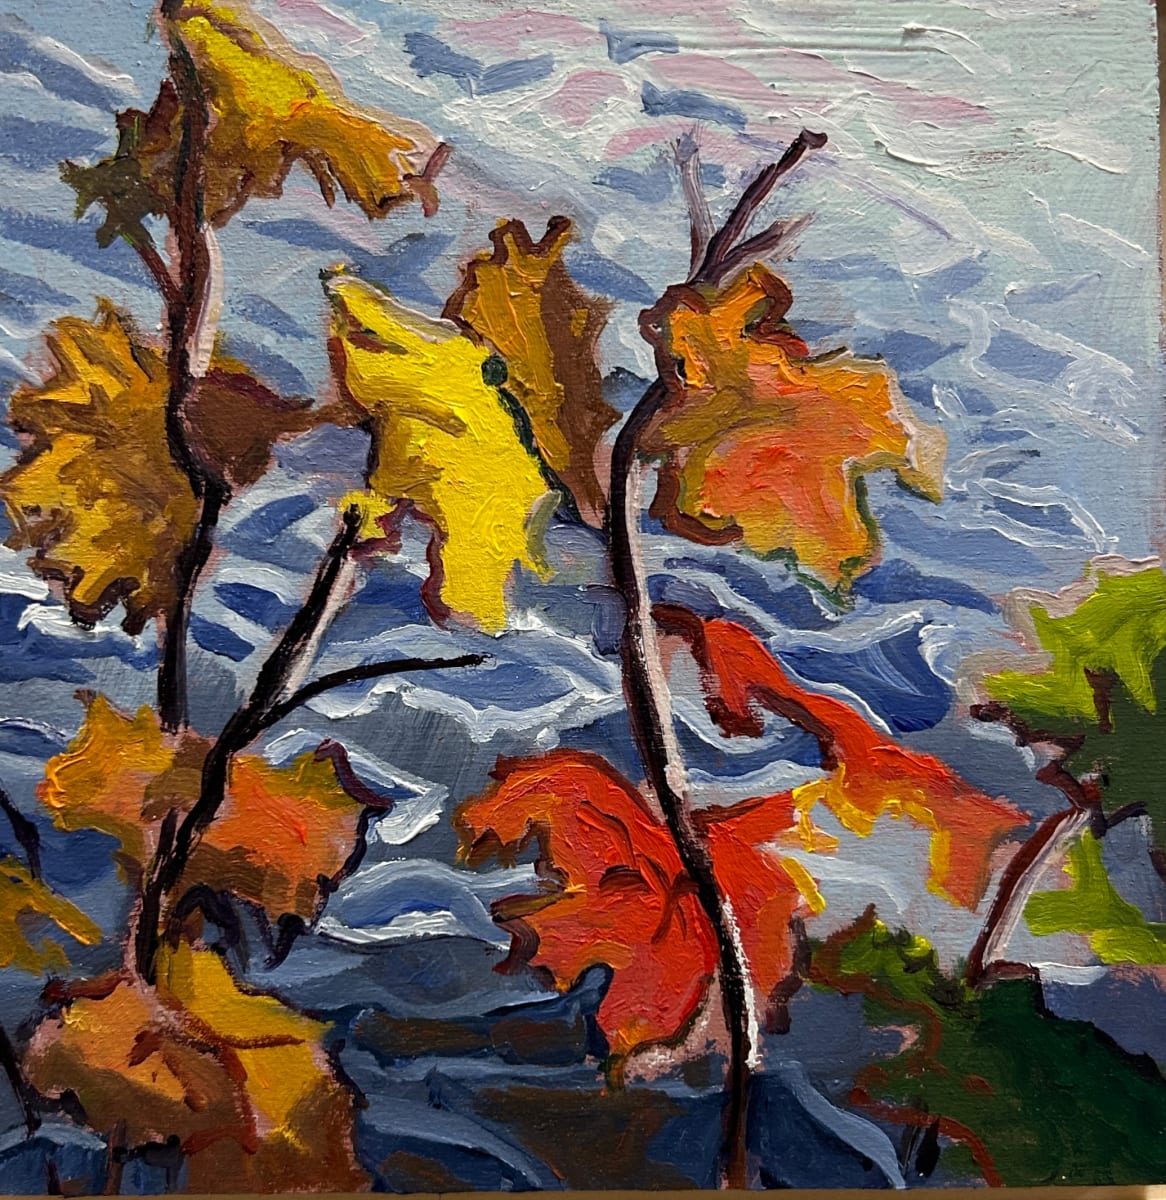 Complementary Colour, Kawartha Lakes, by Lynne Ryall  Image:  A small piece down to reflect the complementary colours of autumn leaves against water